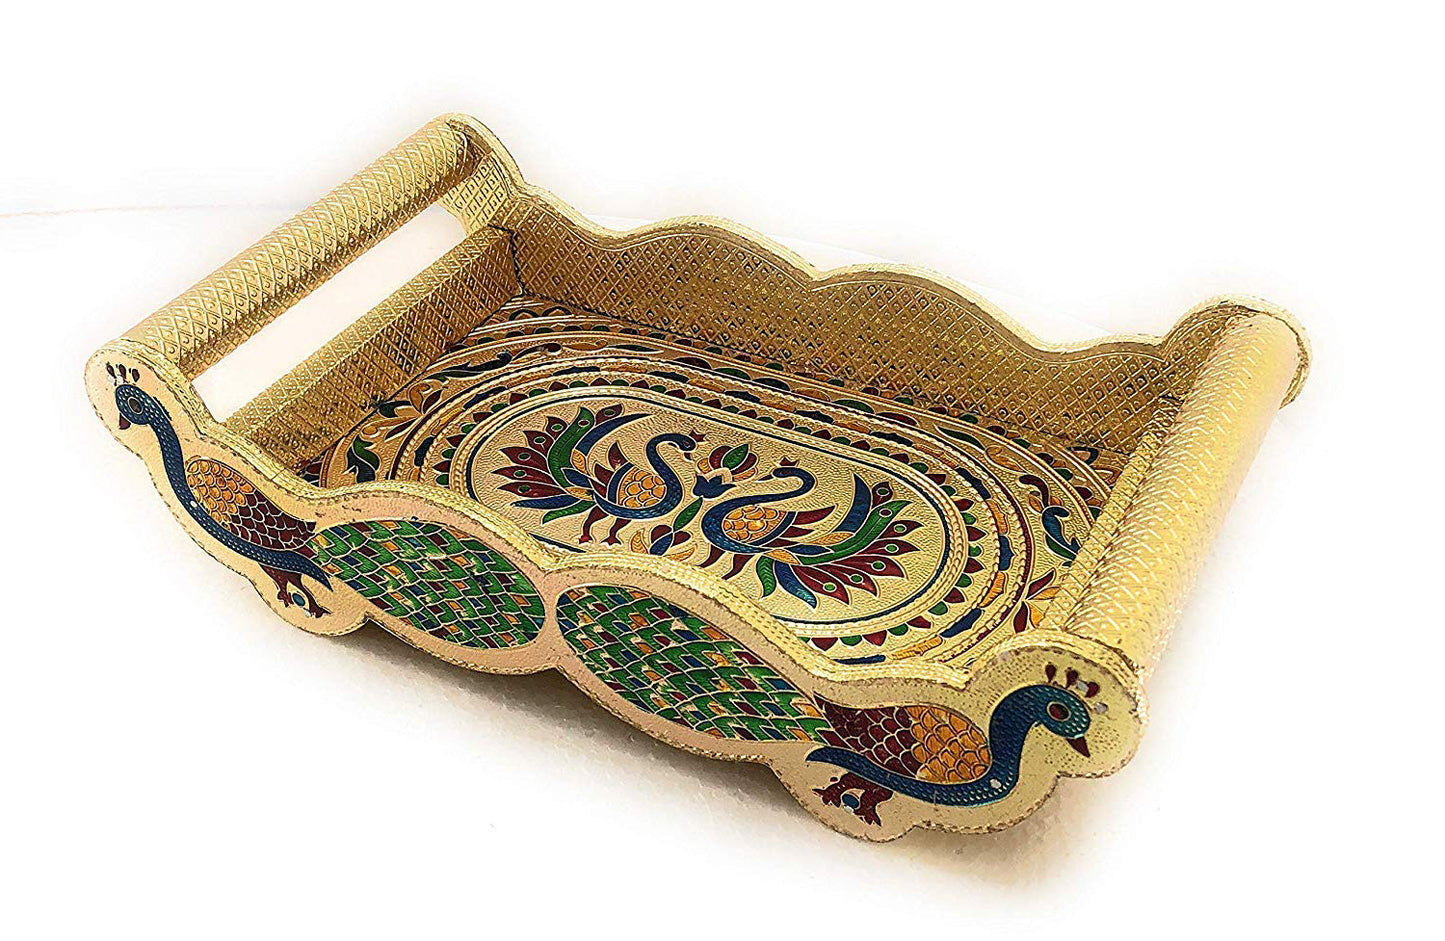 Peacock Design Glass with Handle and Handicraft Serving Tray Set